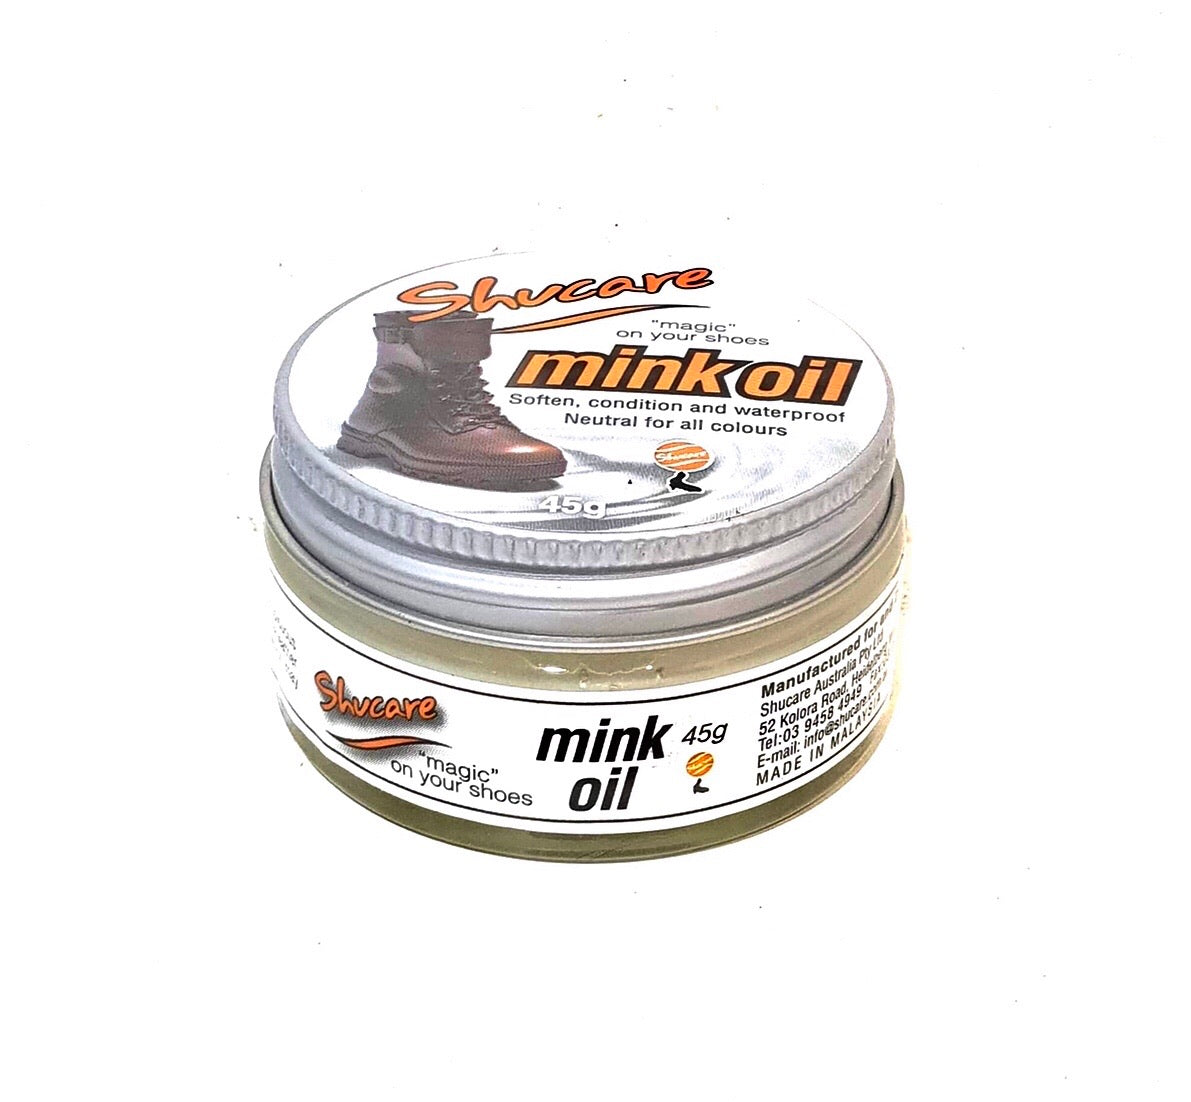 Shoe Care Products Shucare Mink Oil Neutral 45g